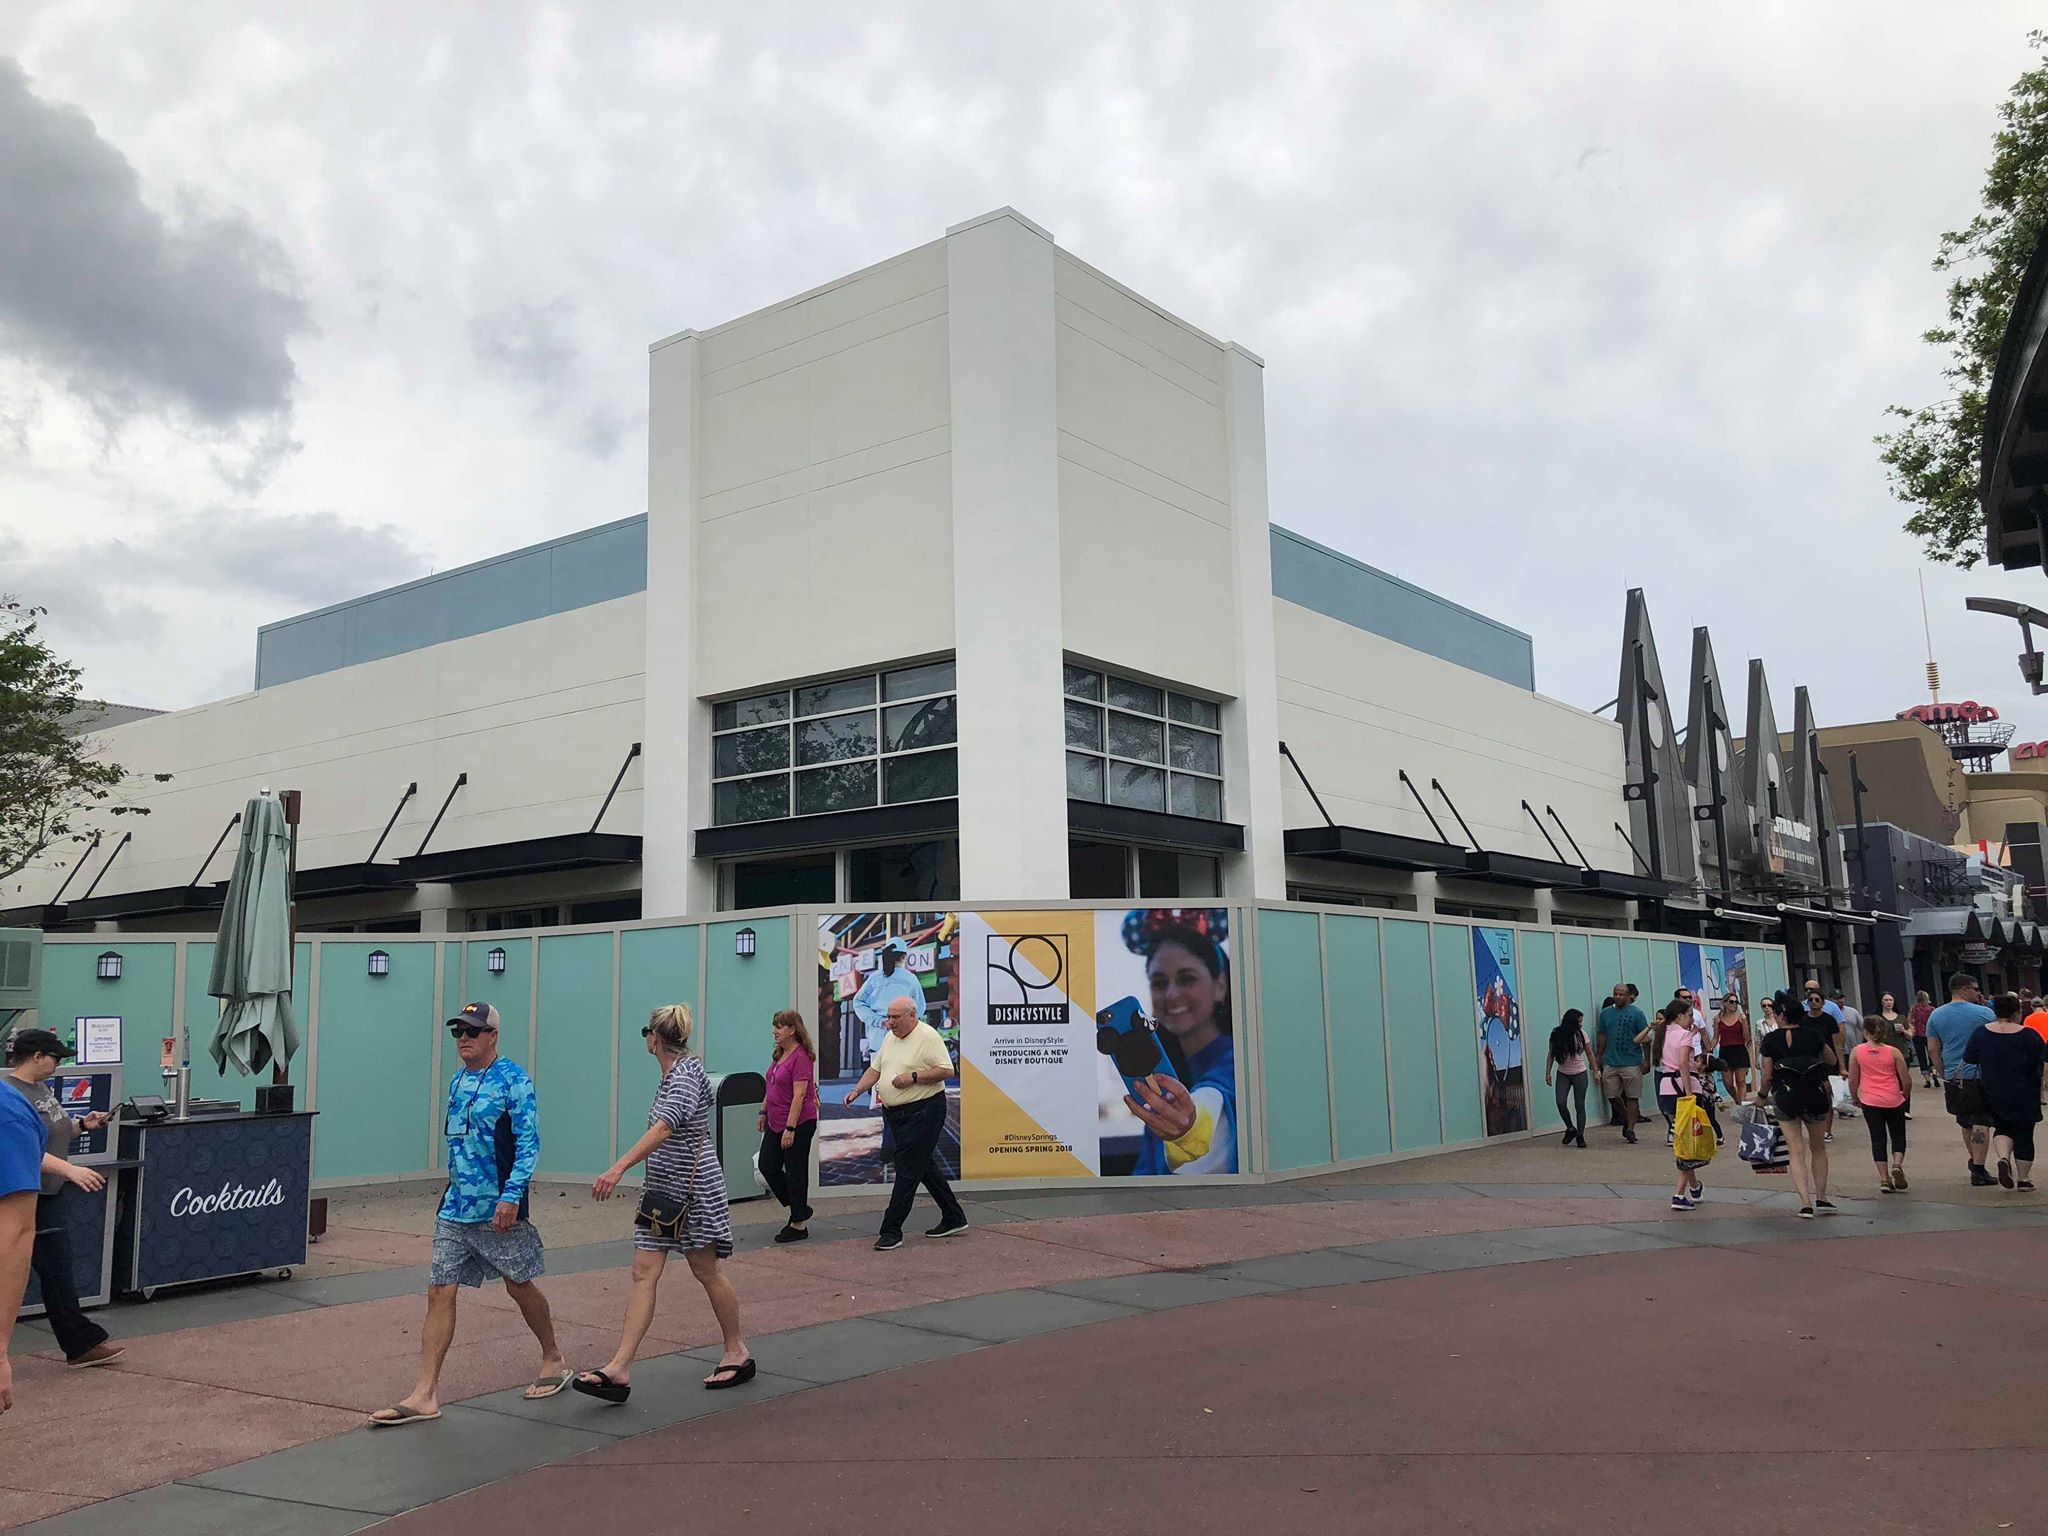 Construction Update on DisneyStyle at Disney Springs